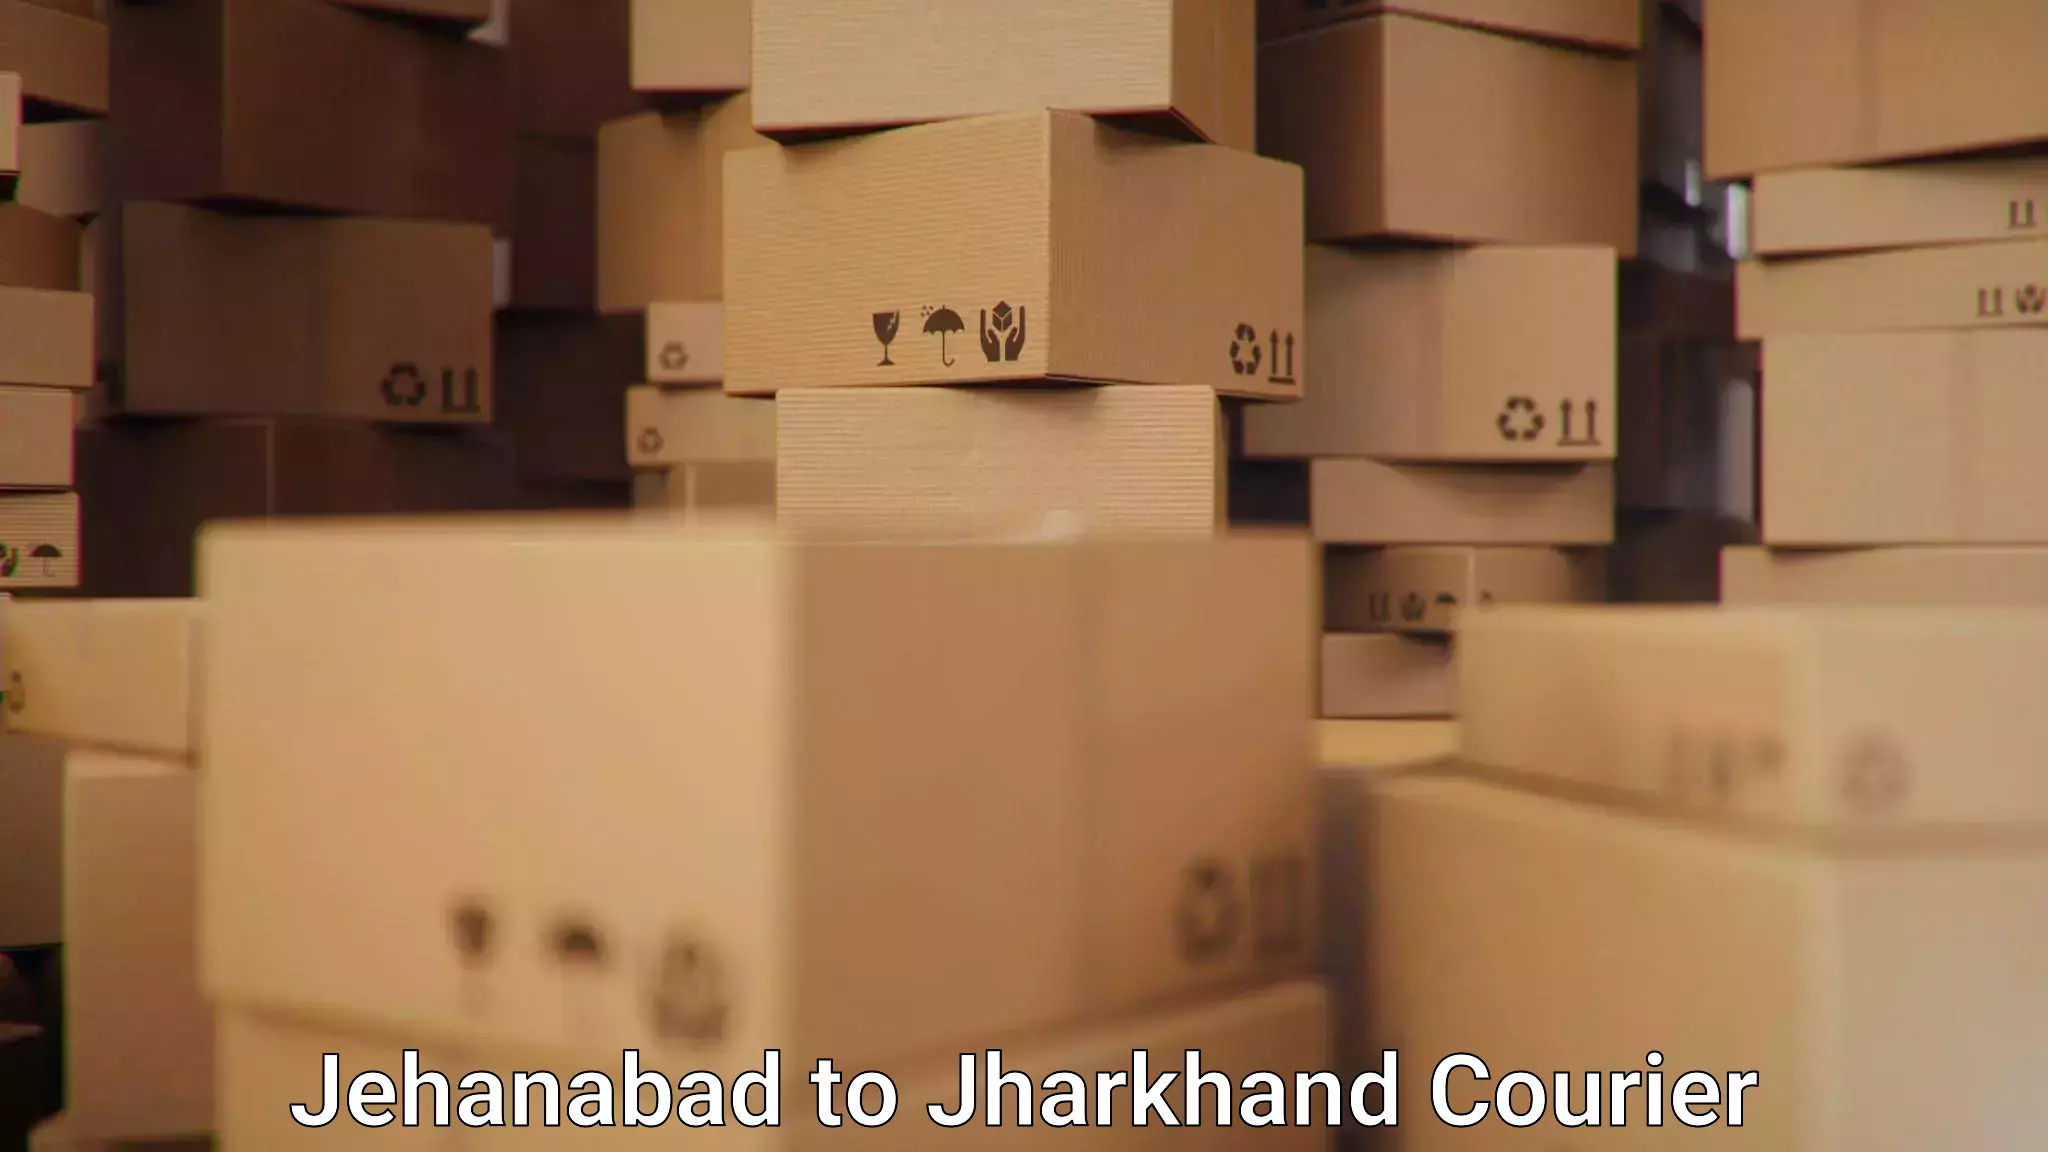 Express delivery capabilities Jehanabad to Jharkhand